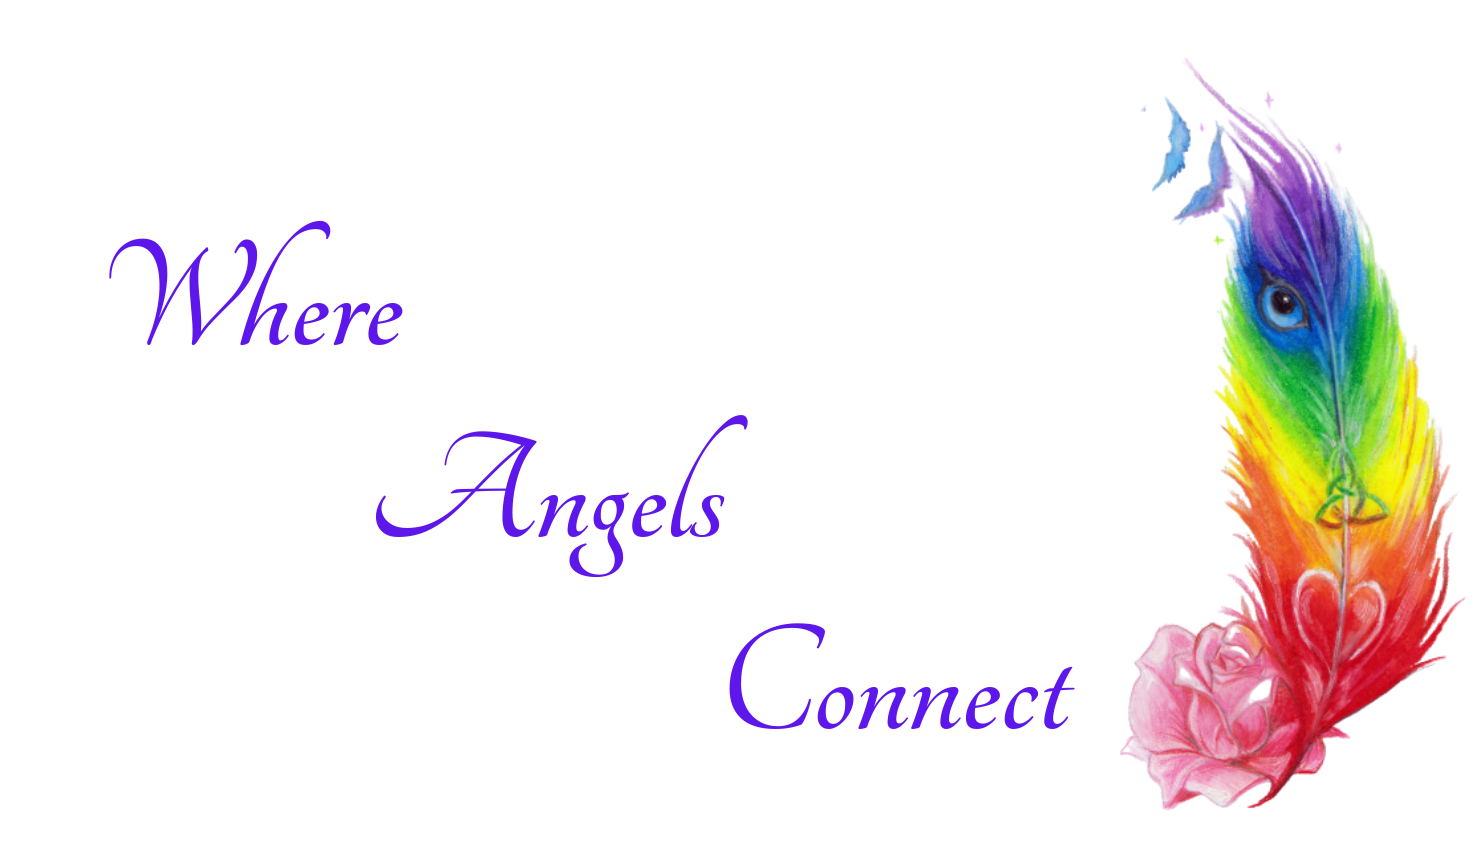 Where Angels Connect